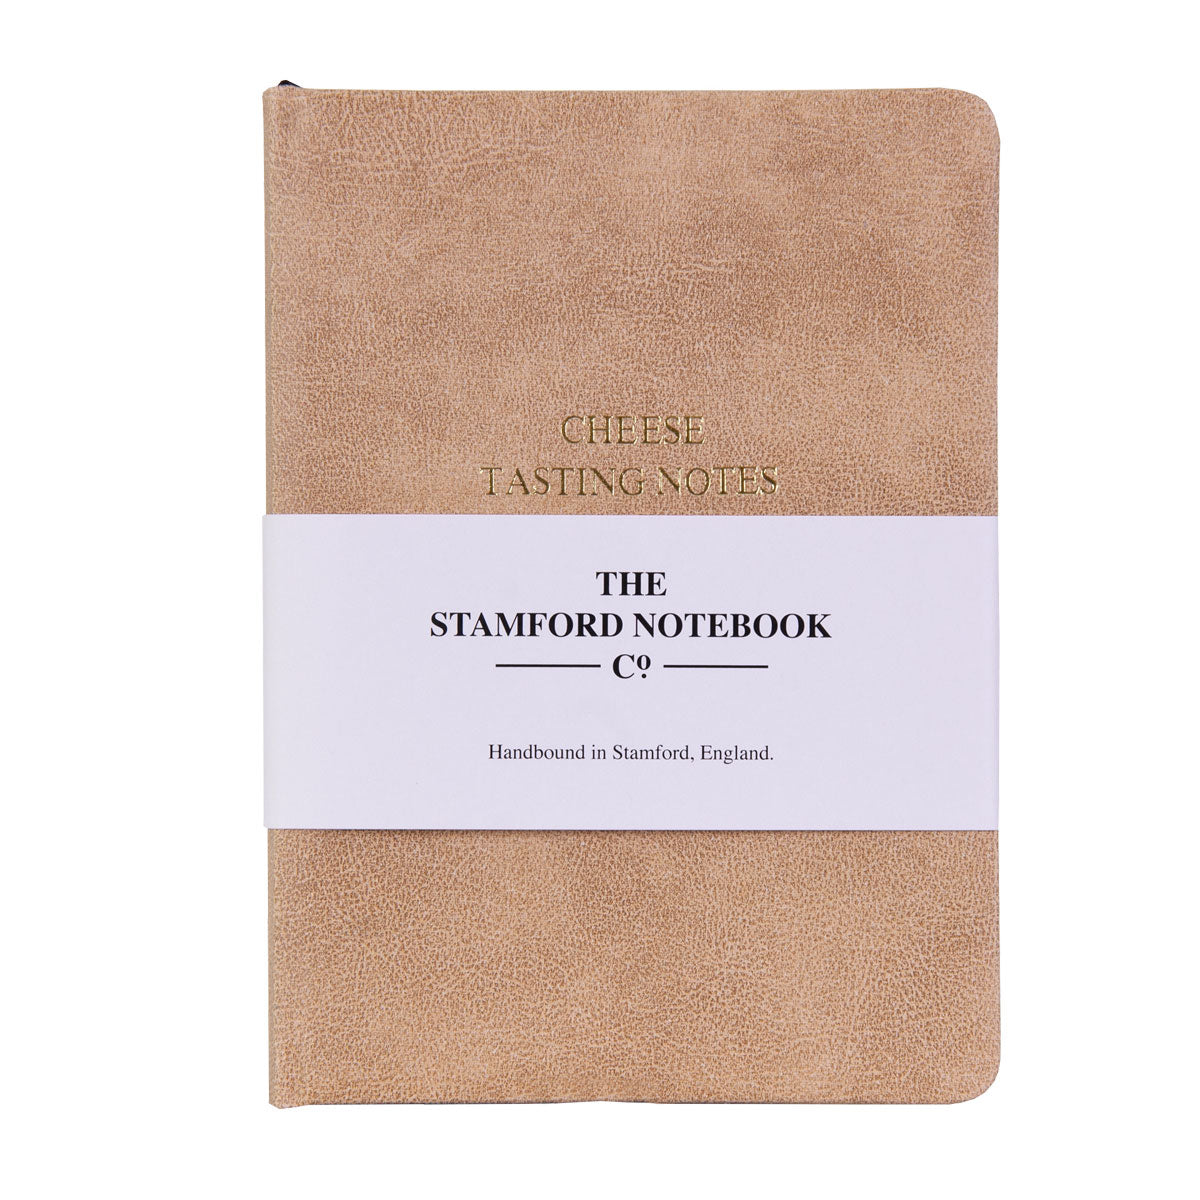 The Cheese Tasting Journal - Vintage recycled leather sand